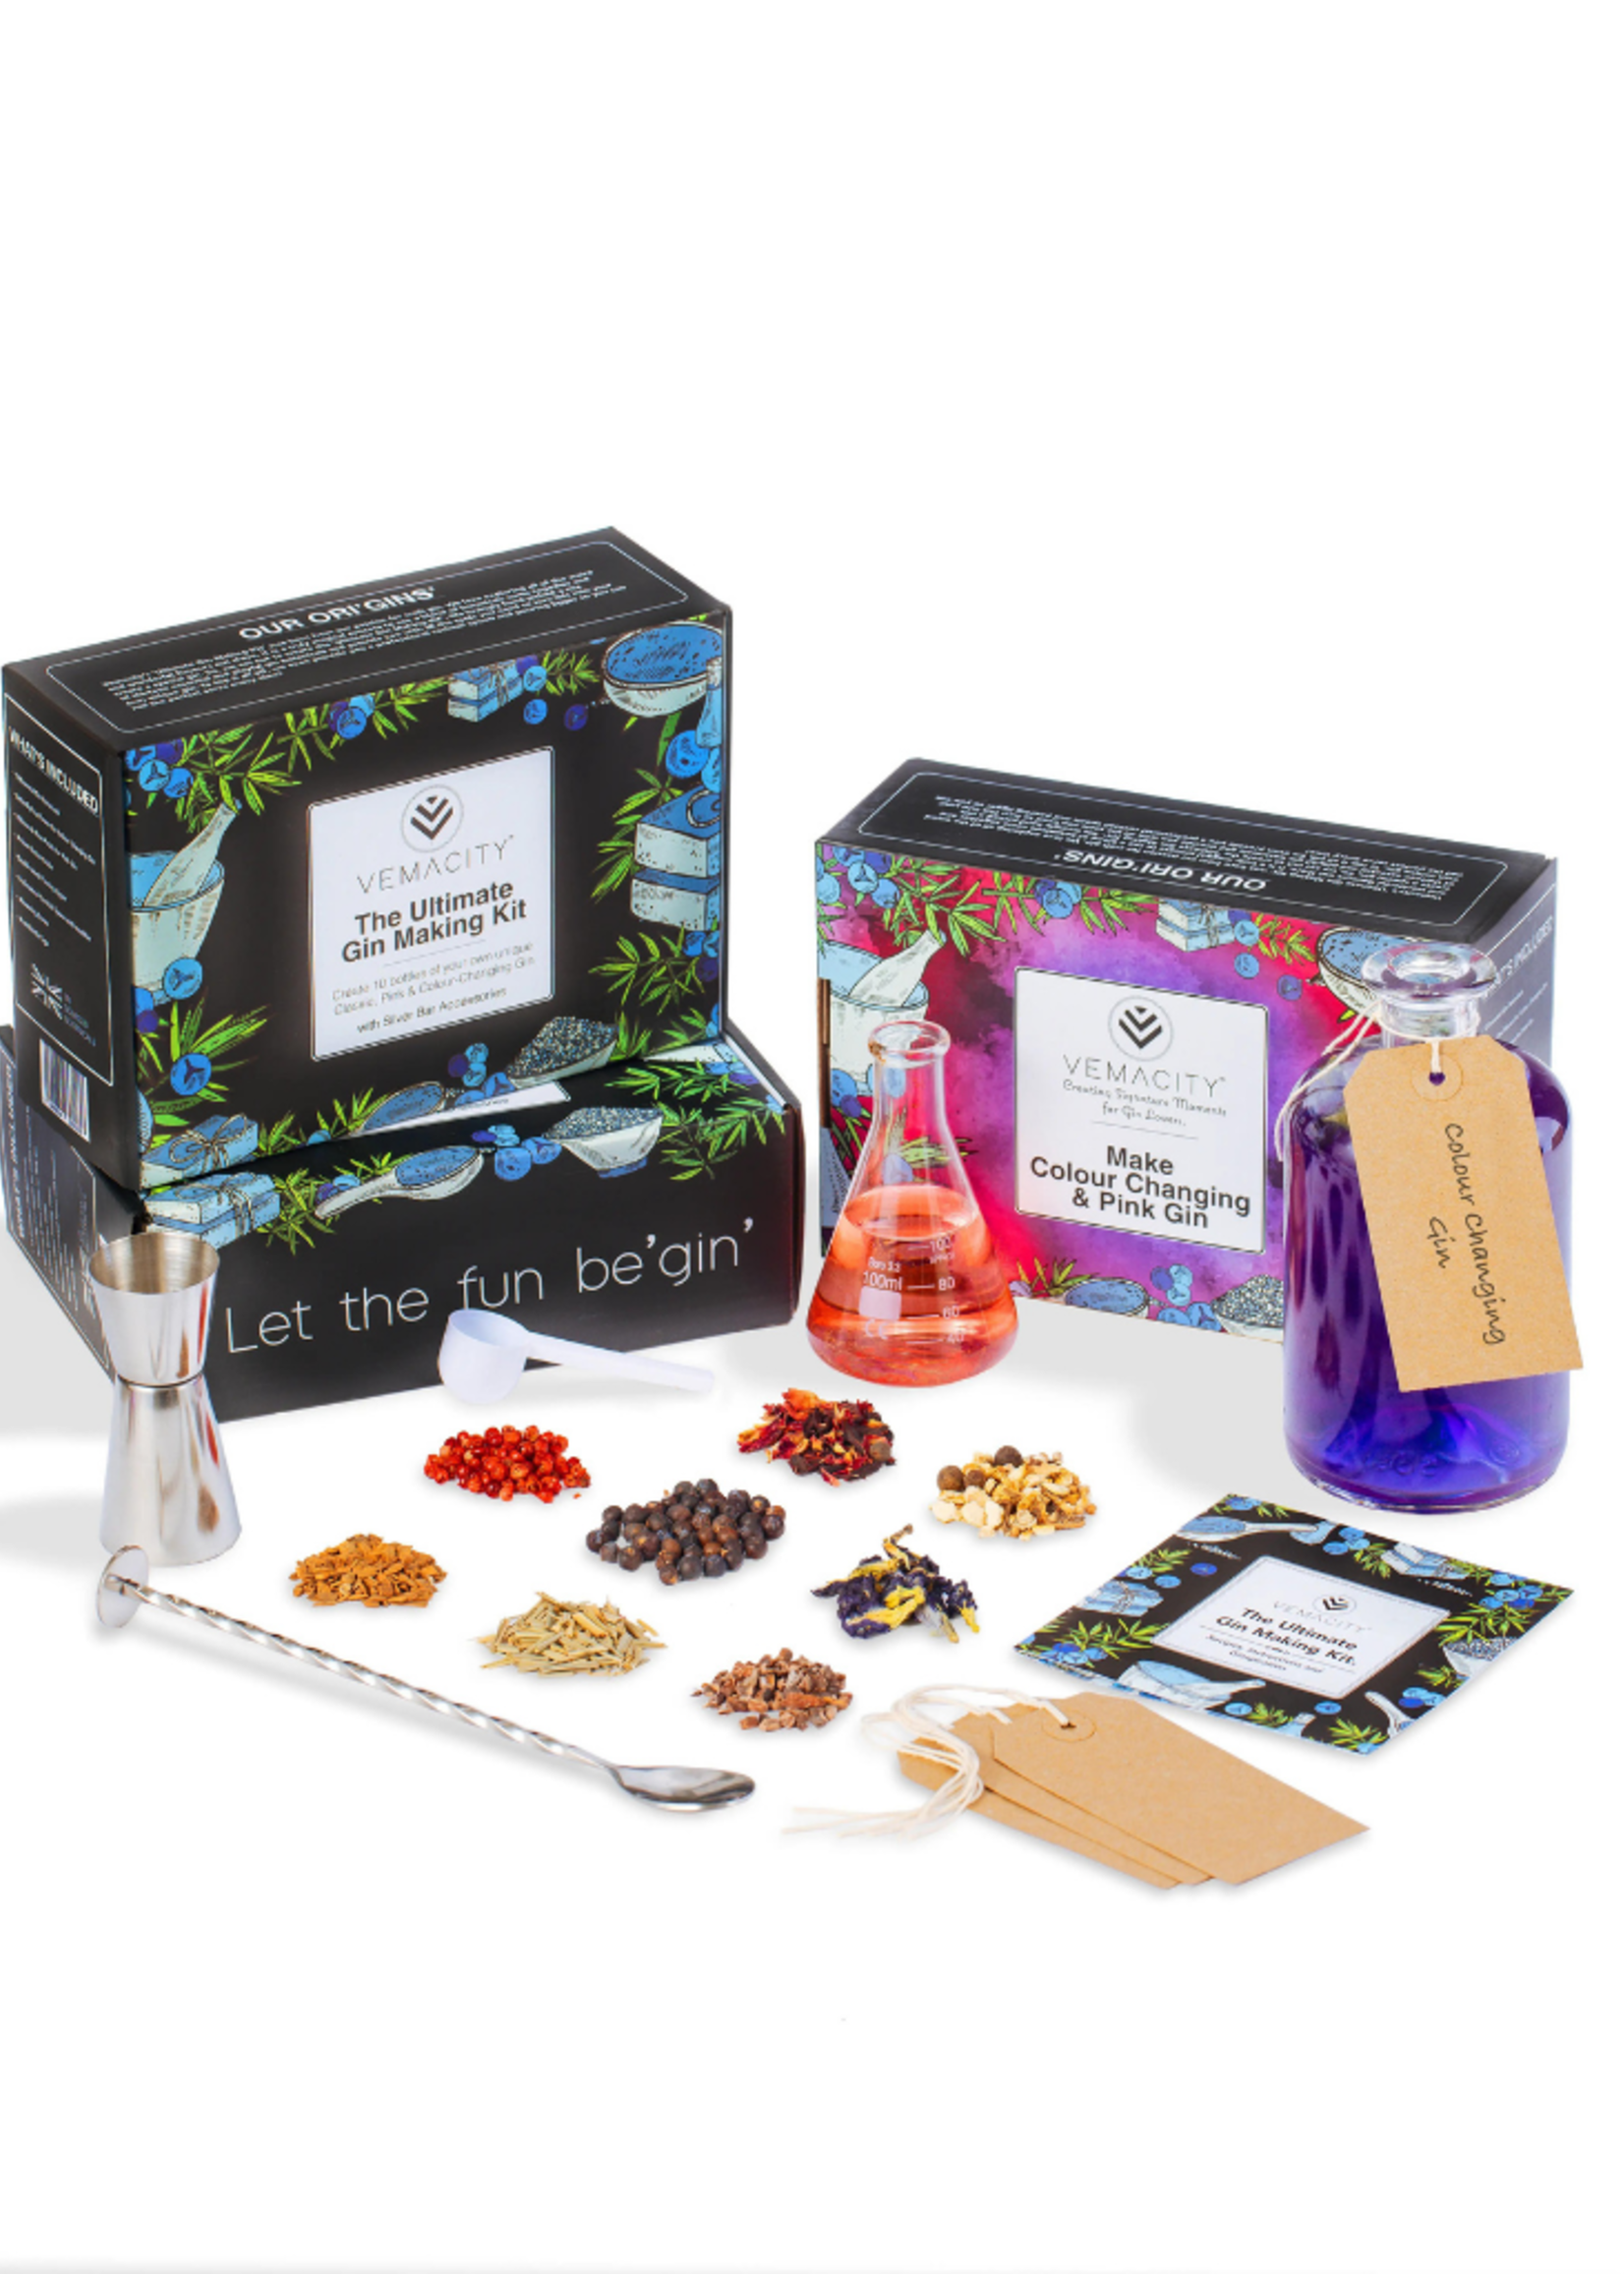 Vemacity Vemacity - The Ultimate Gin Making Kit with Silver Bar Accessories